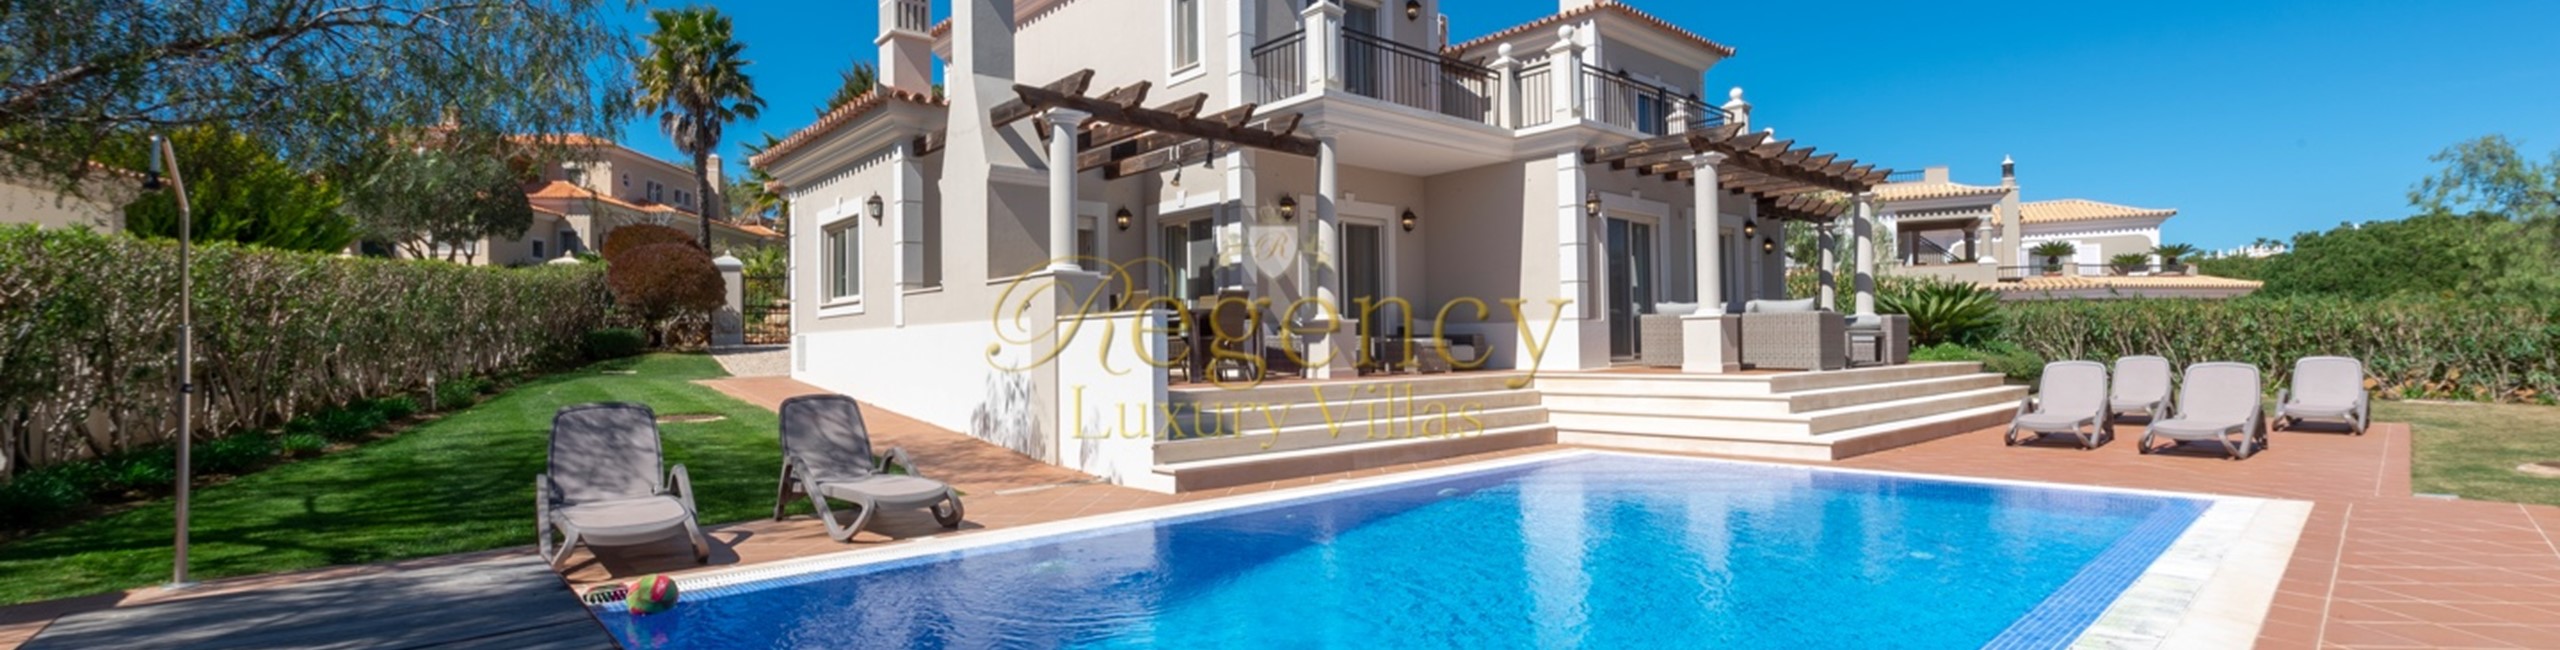 Vale Do Lobo Villas To Rent With Pool